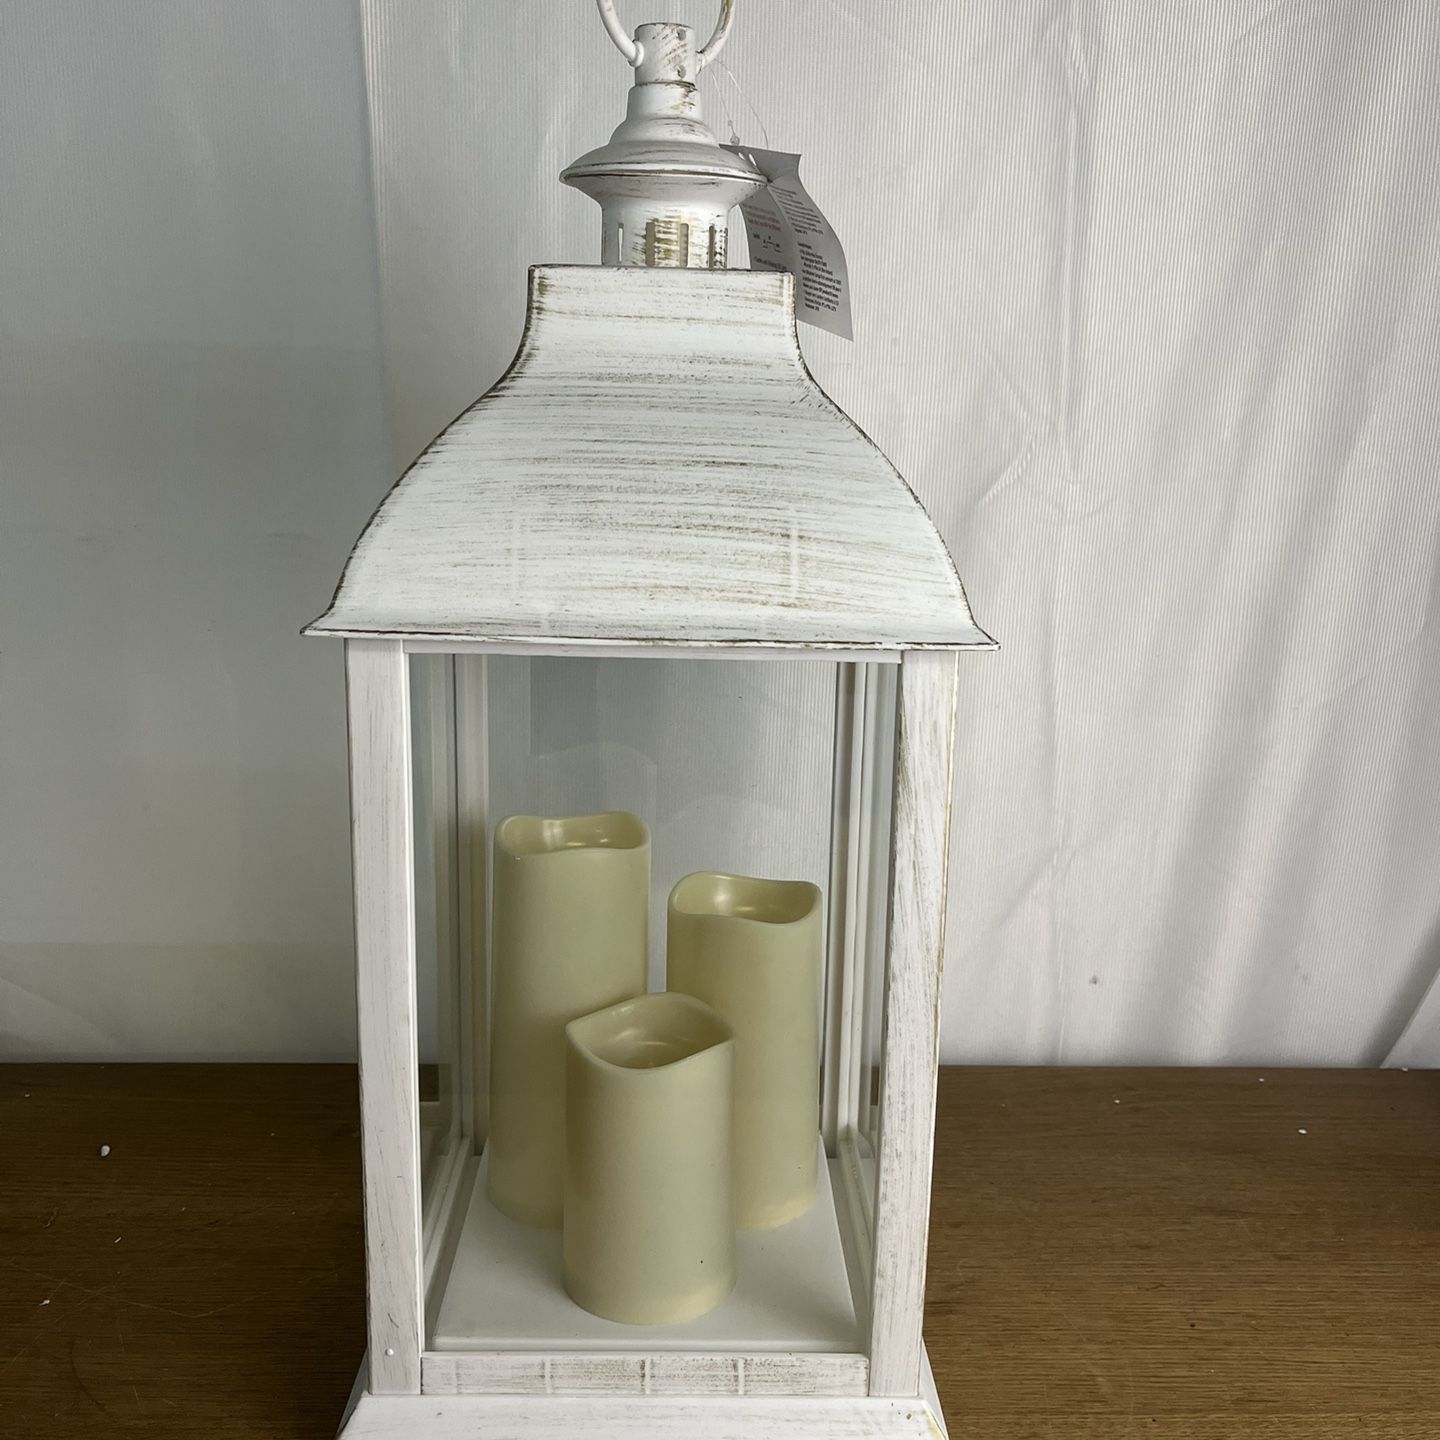 22" Tall Outdoor Battery-Operated Lantern with LED Lights, White